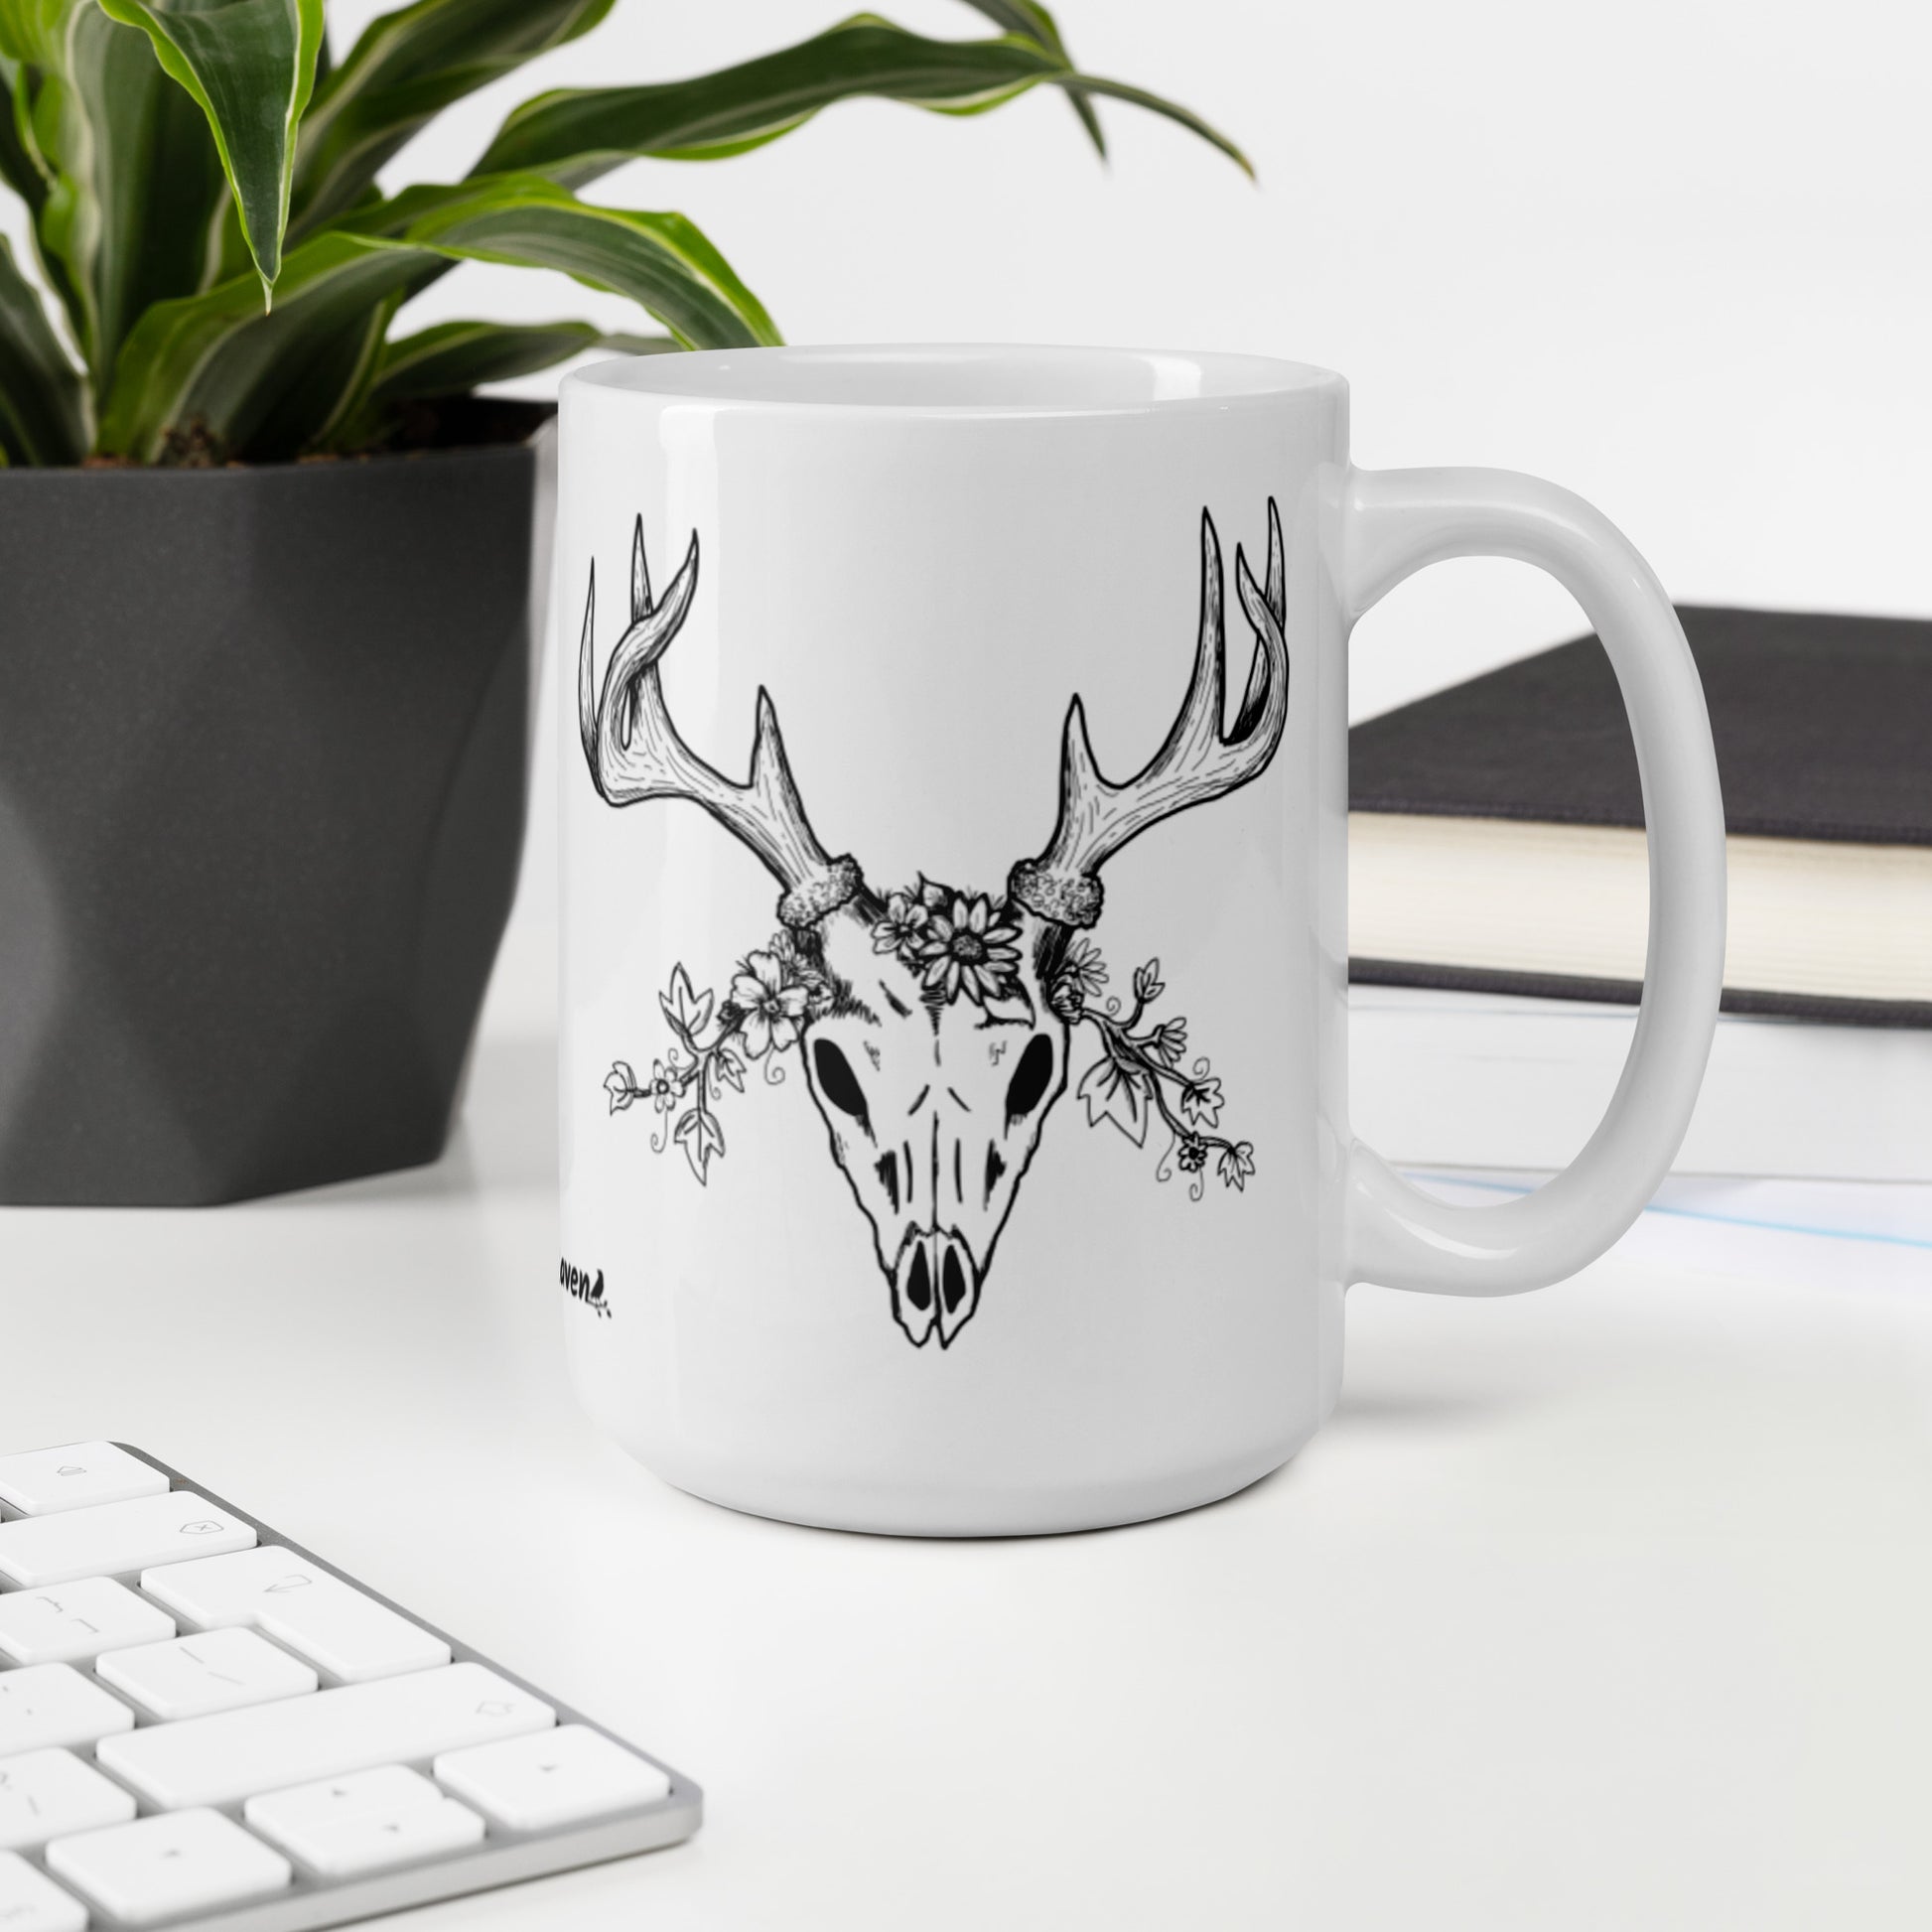 15 oz white ceramic mug. Features a double-sided hand illustrated image of a deer skull wreathed in flowers. Shown on desktop by keyboard, potted plant, and books.